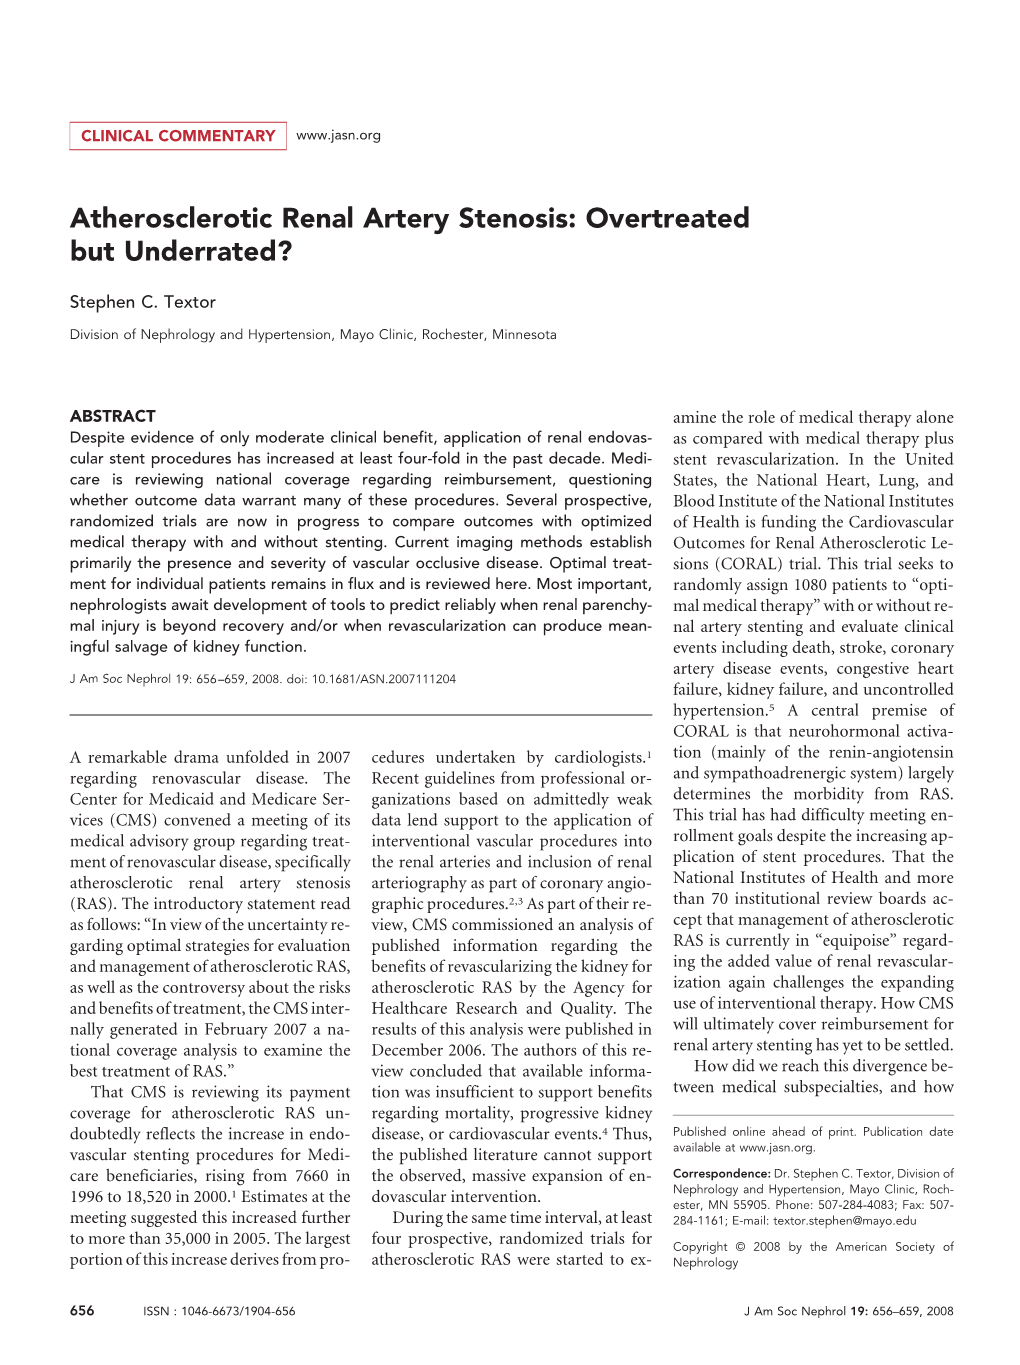 Atherosclerotic Renal Artery Stenosis: Overtreated but Underrated?